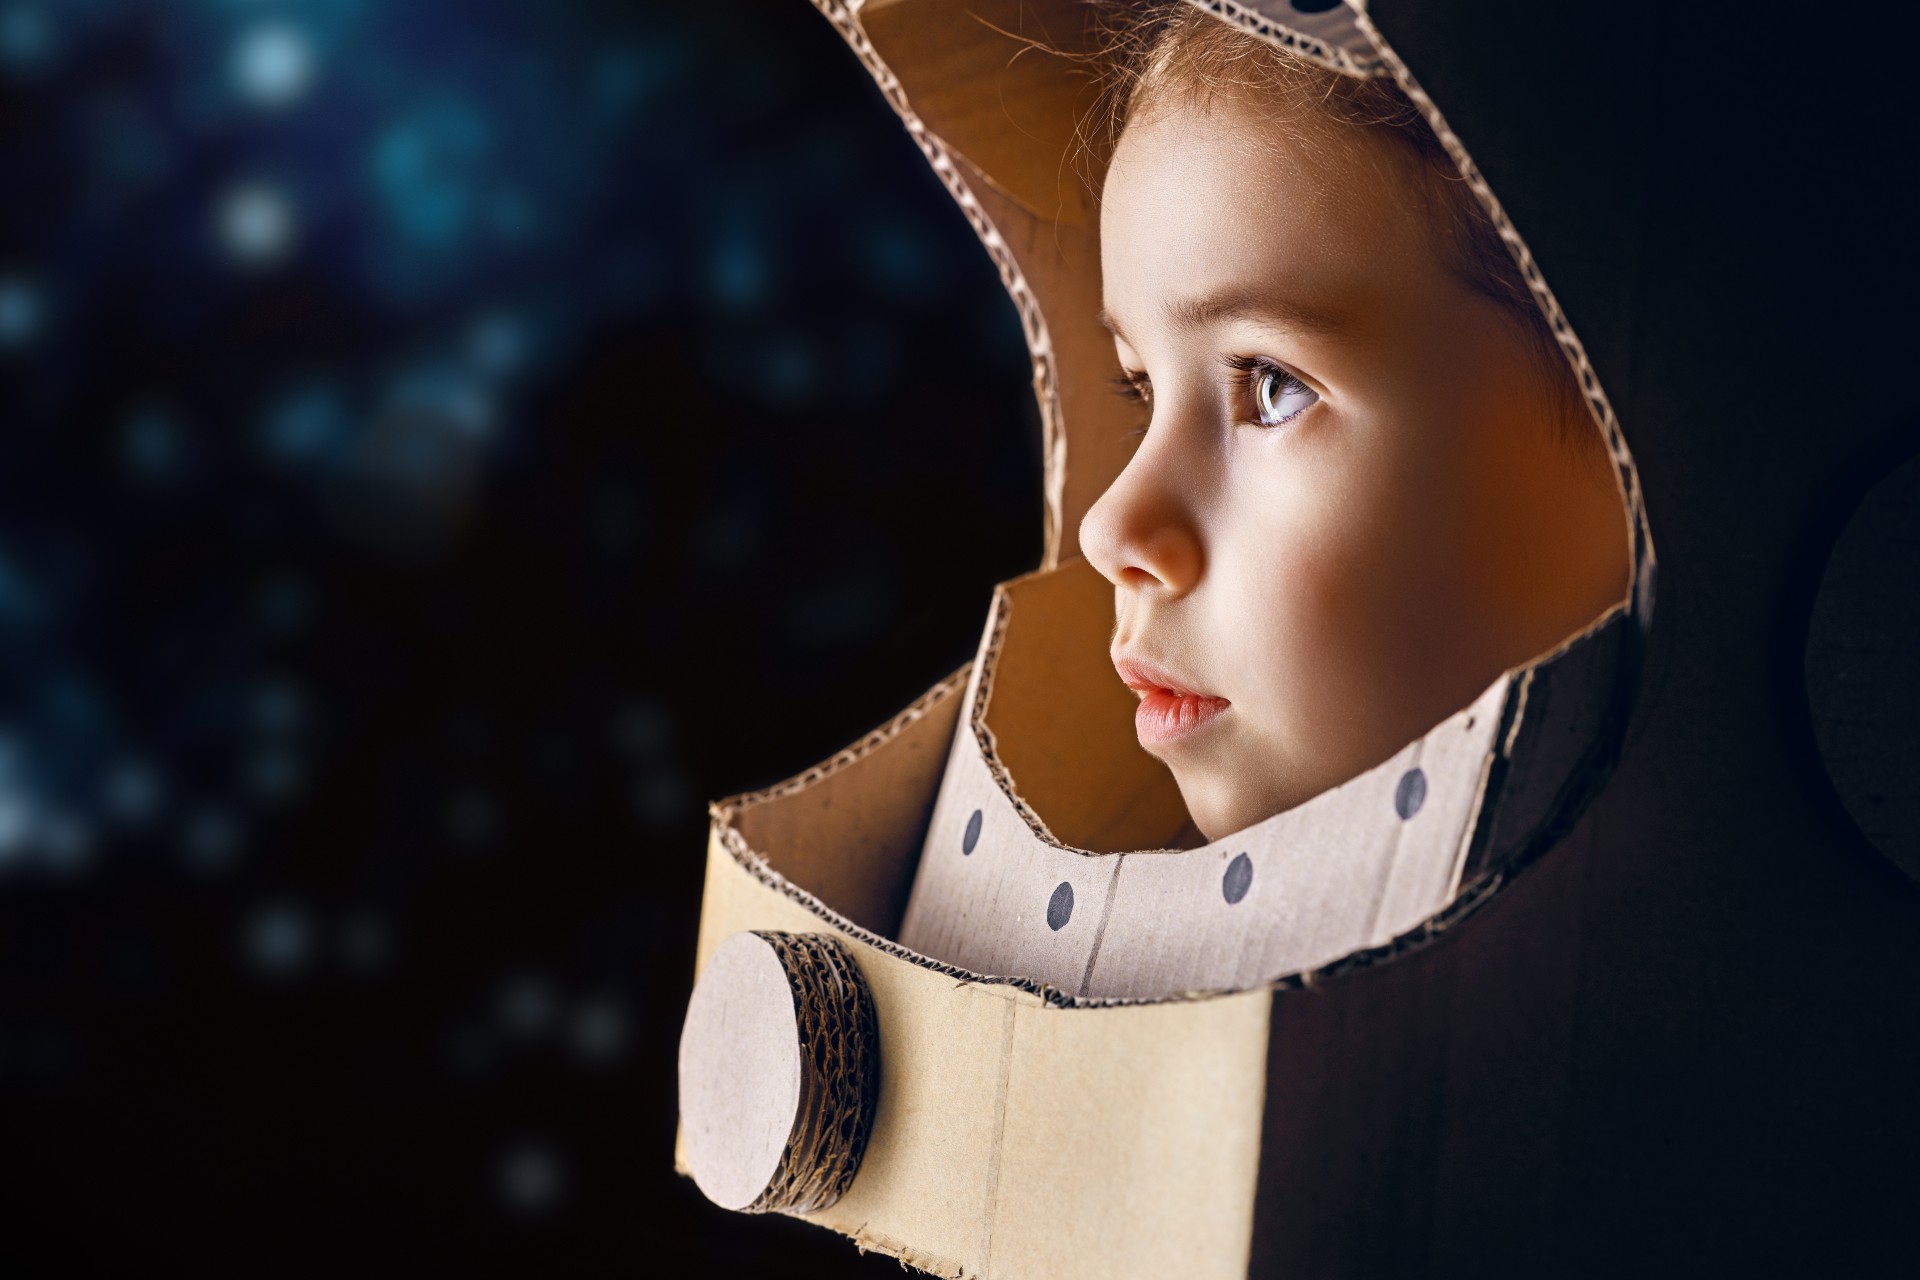 a child plays pretend wearing a space helmet made of cardboard